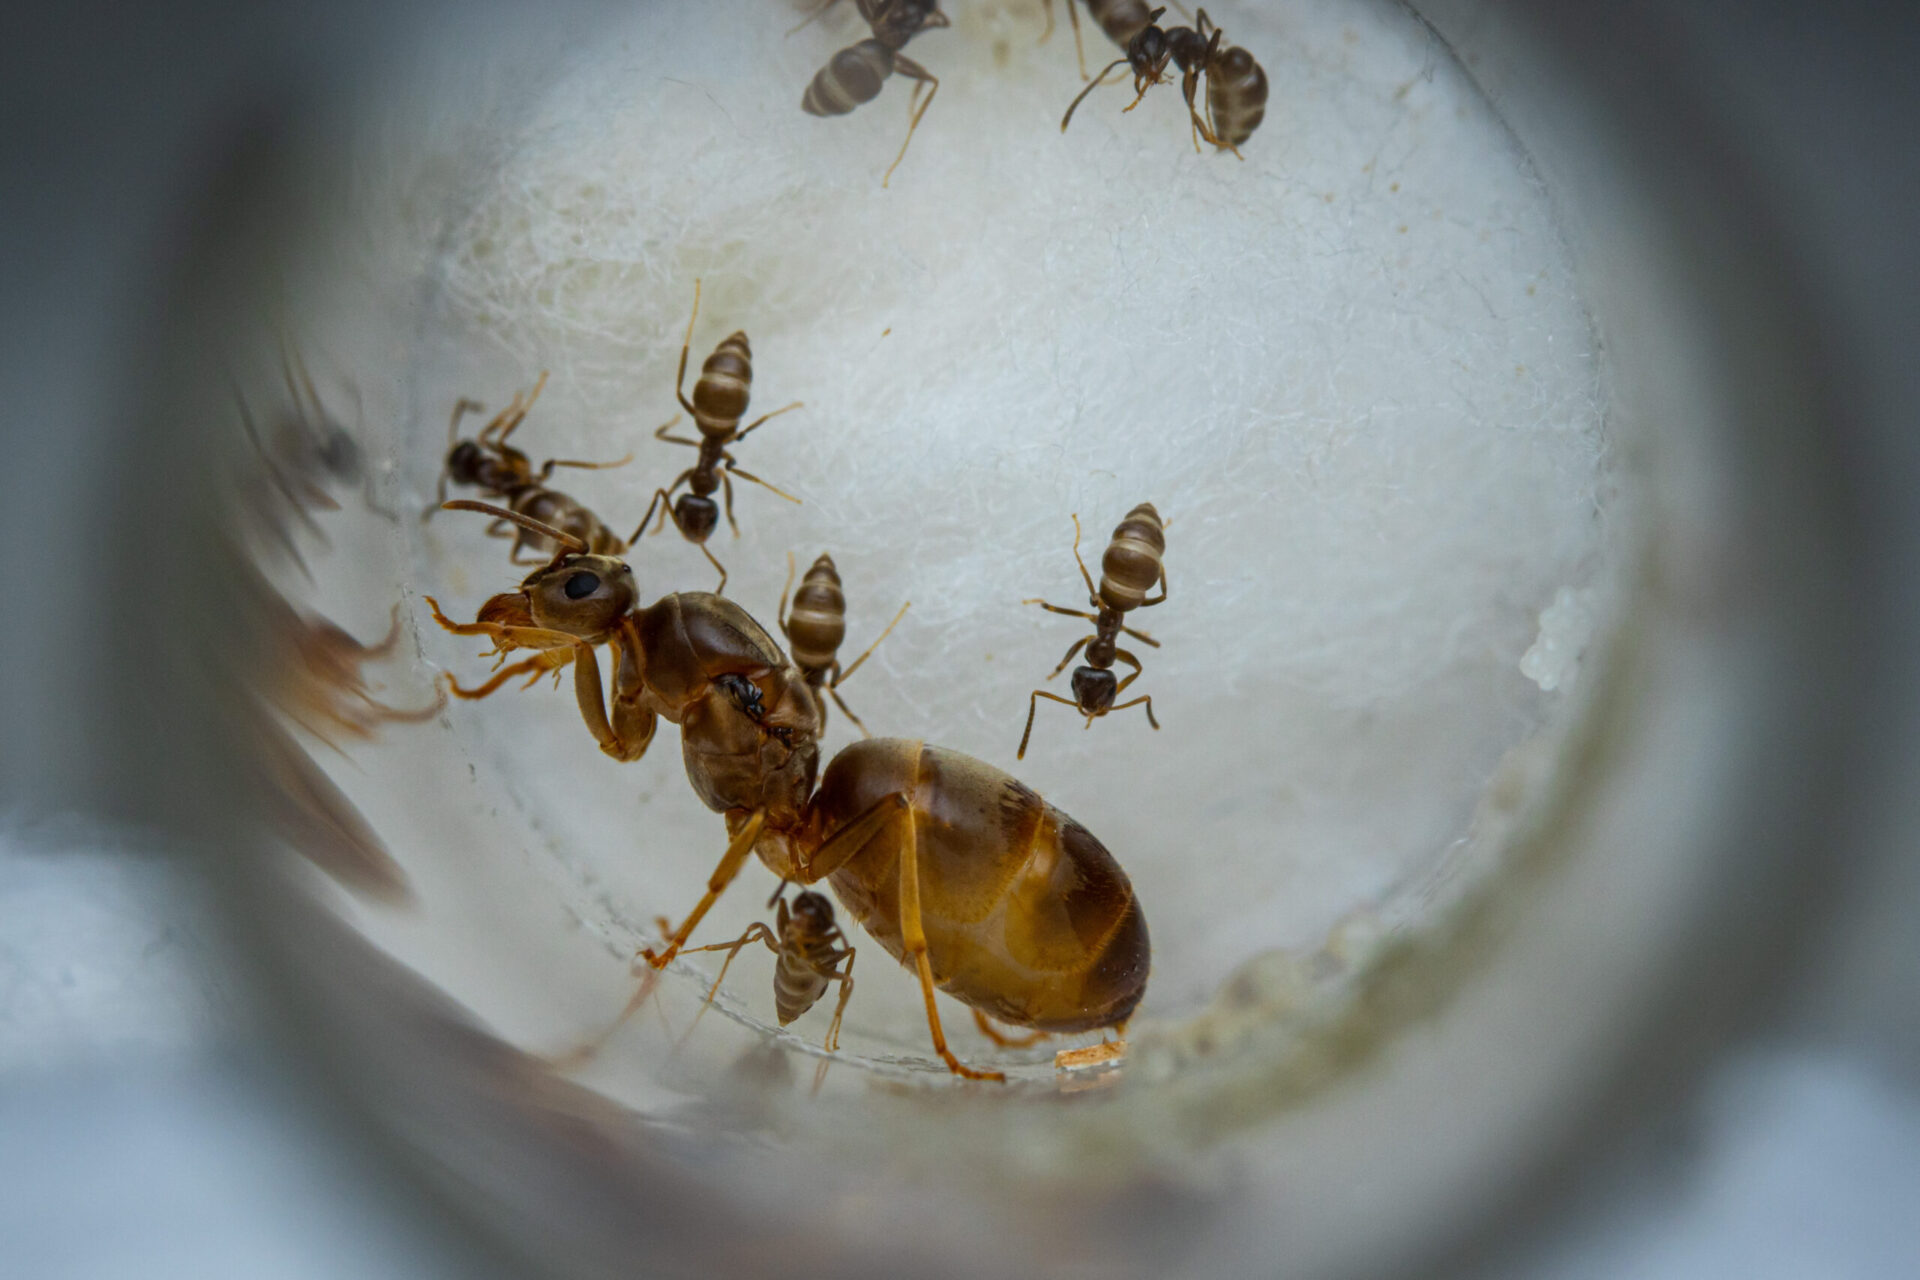 A small Lasius neoniger colony.